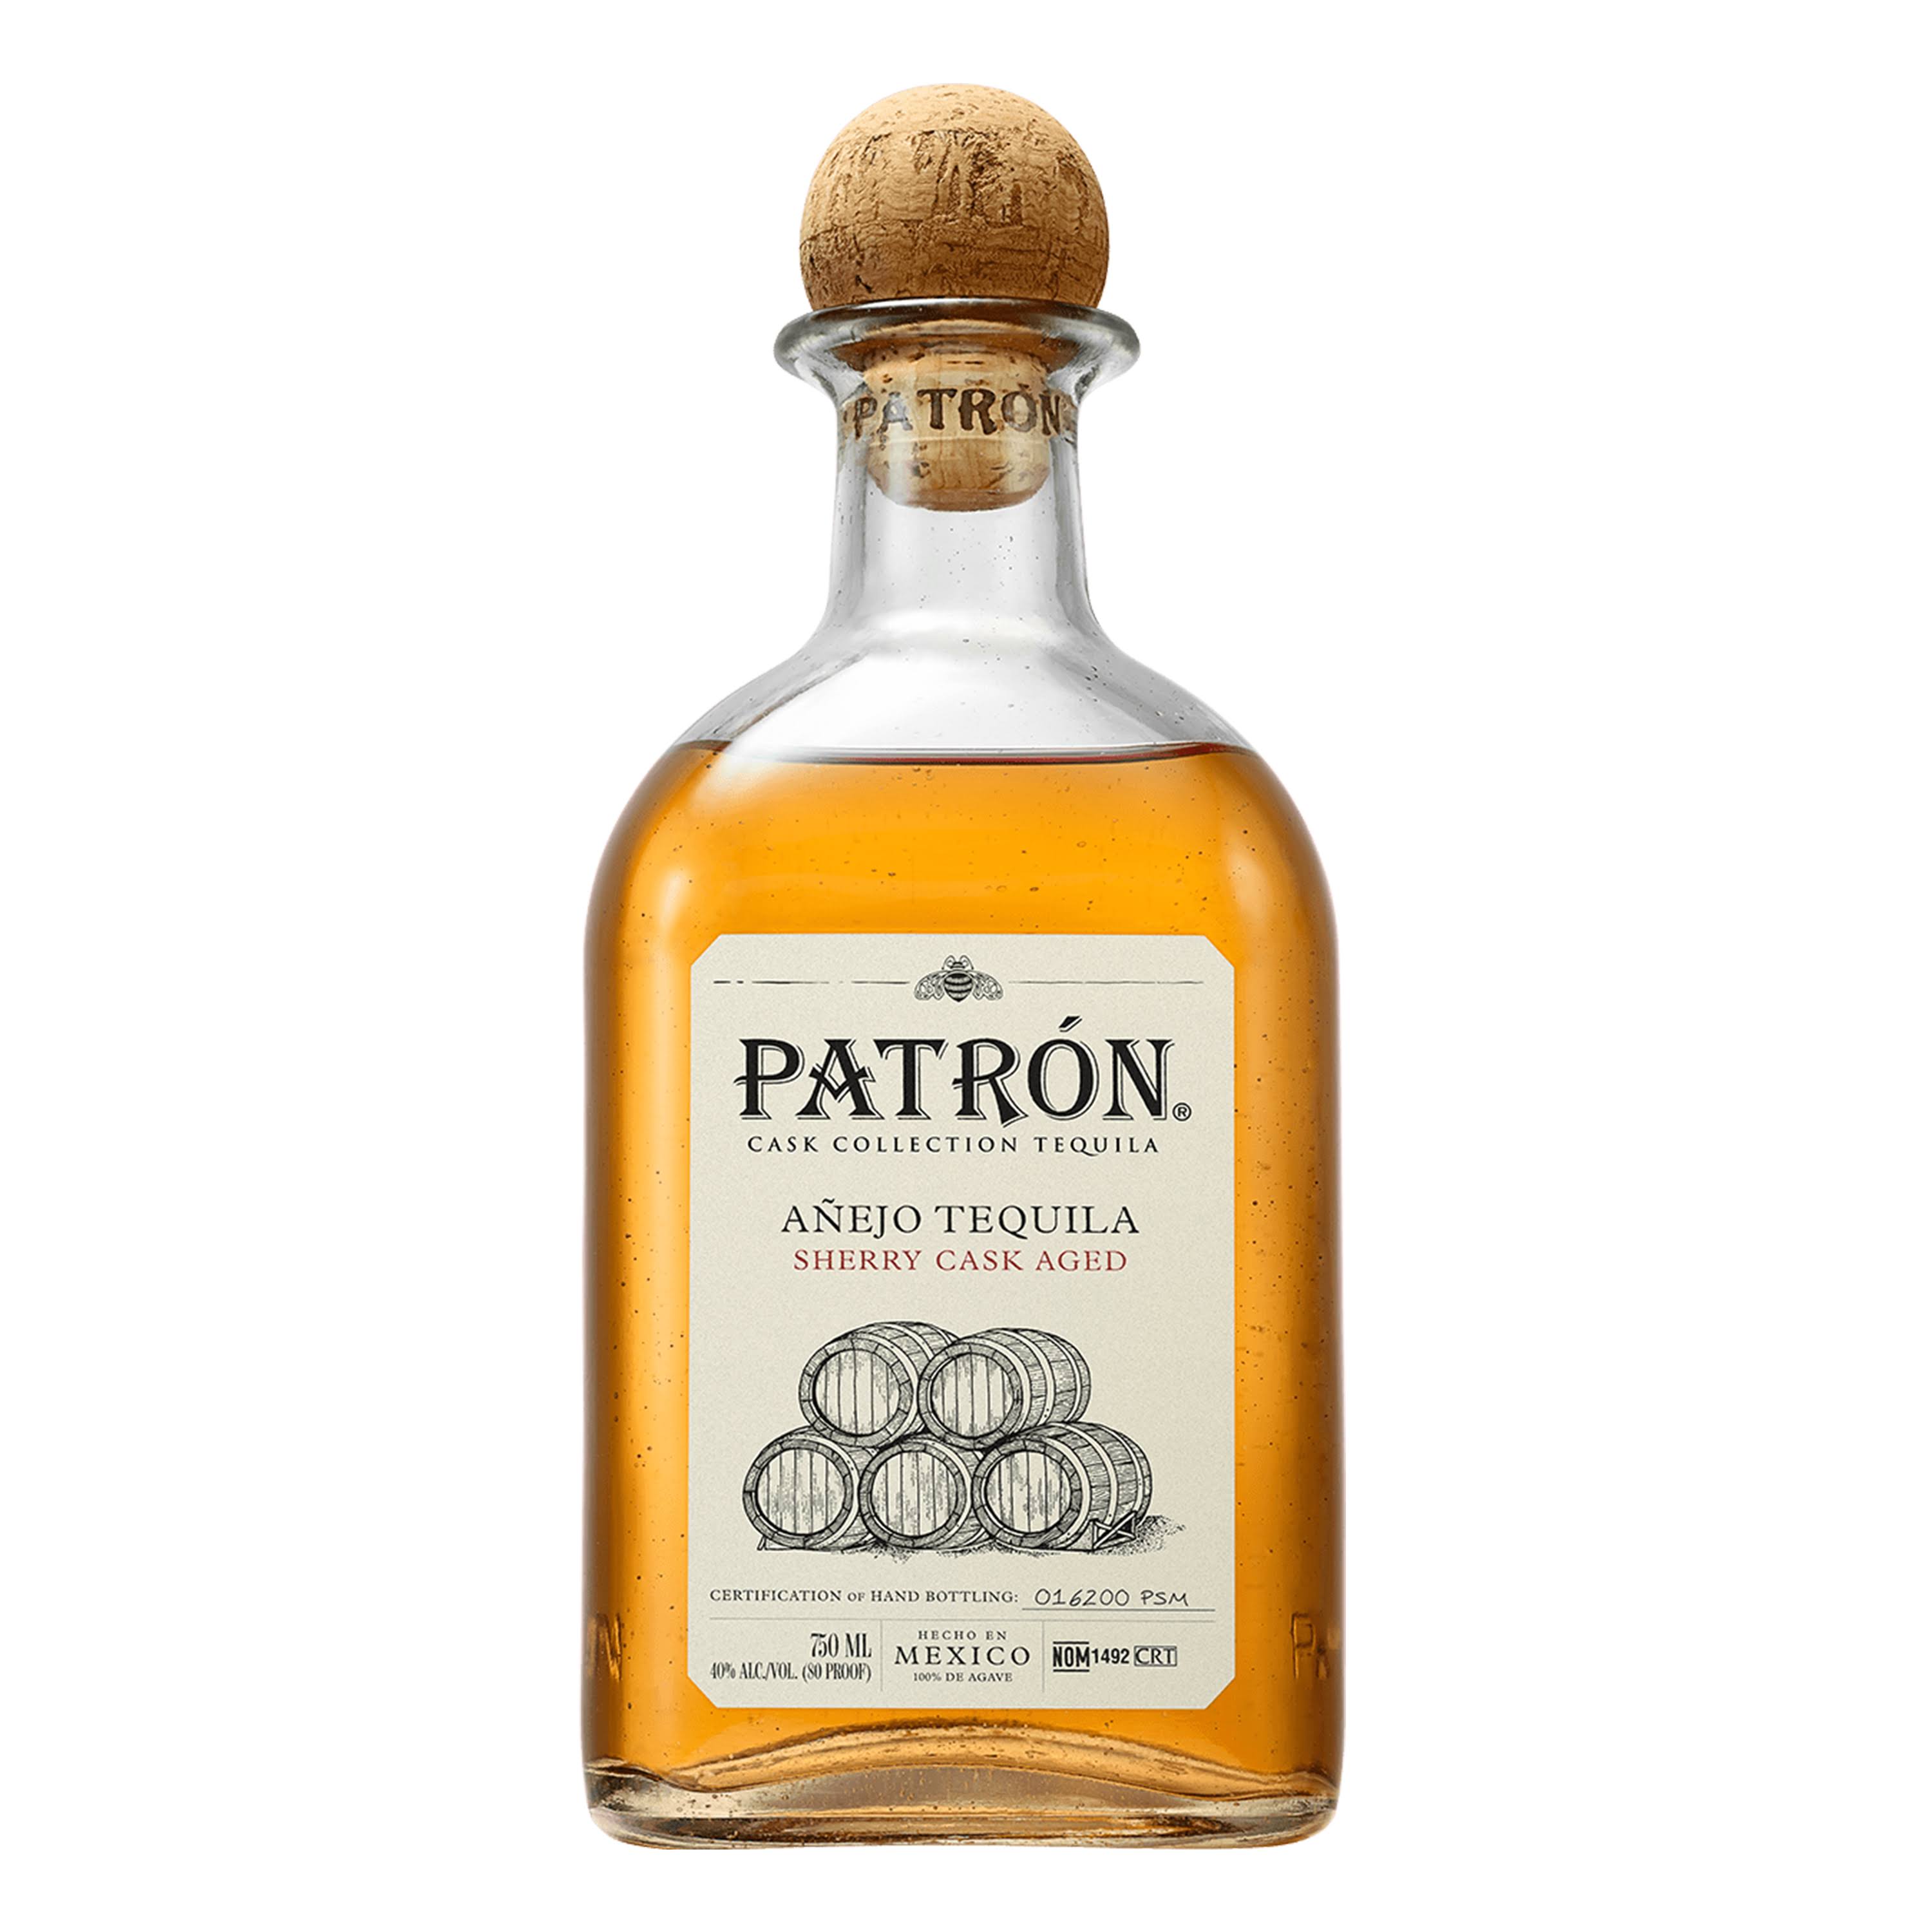 Patron Cask Collection Tequila, Anejo, Sherry Cask Aged - 750 ml